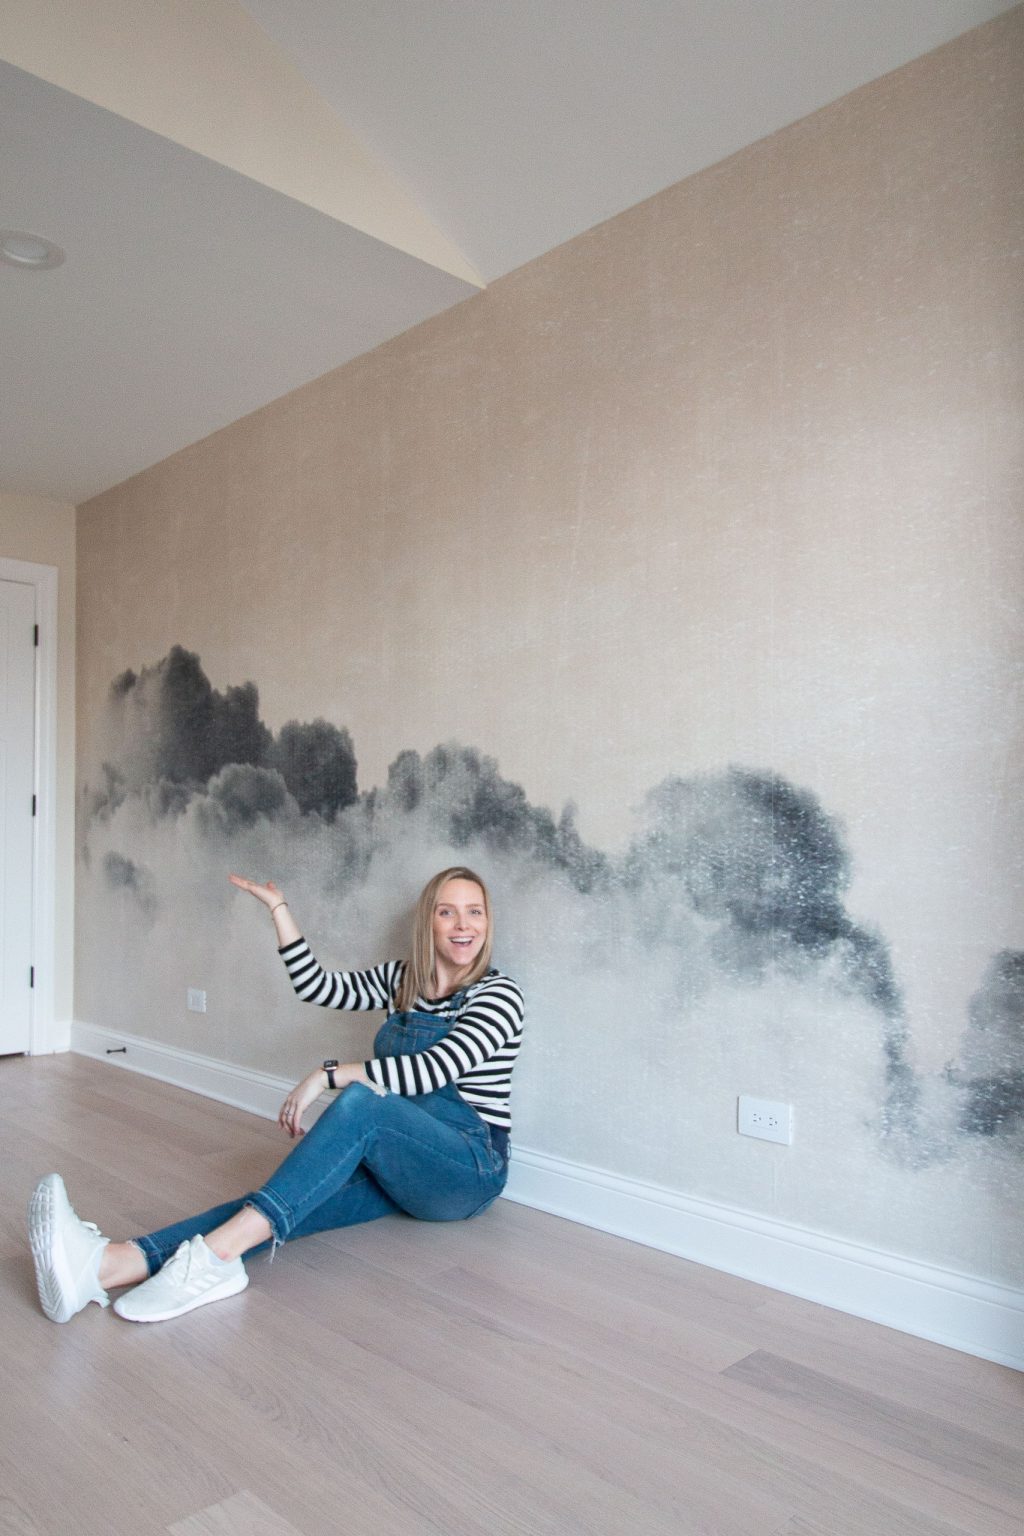 How to install a wall mural in your home